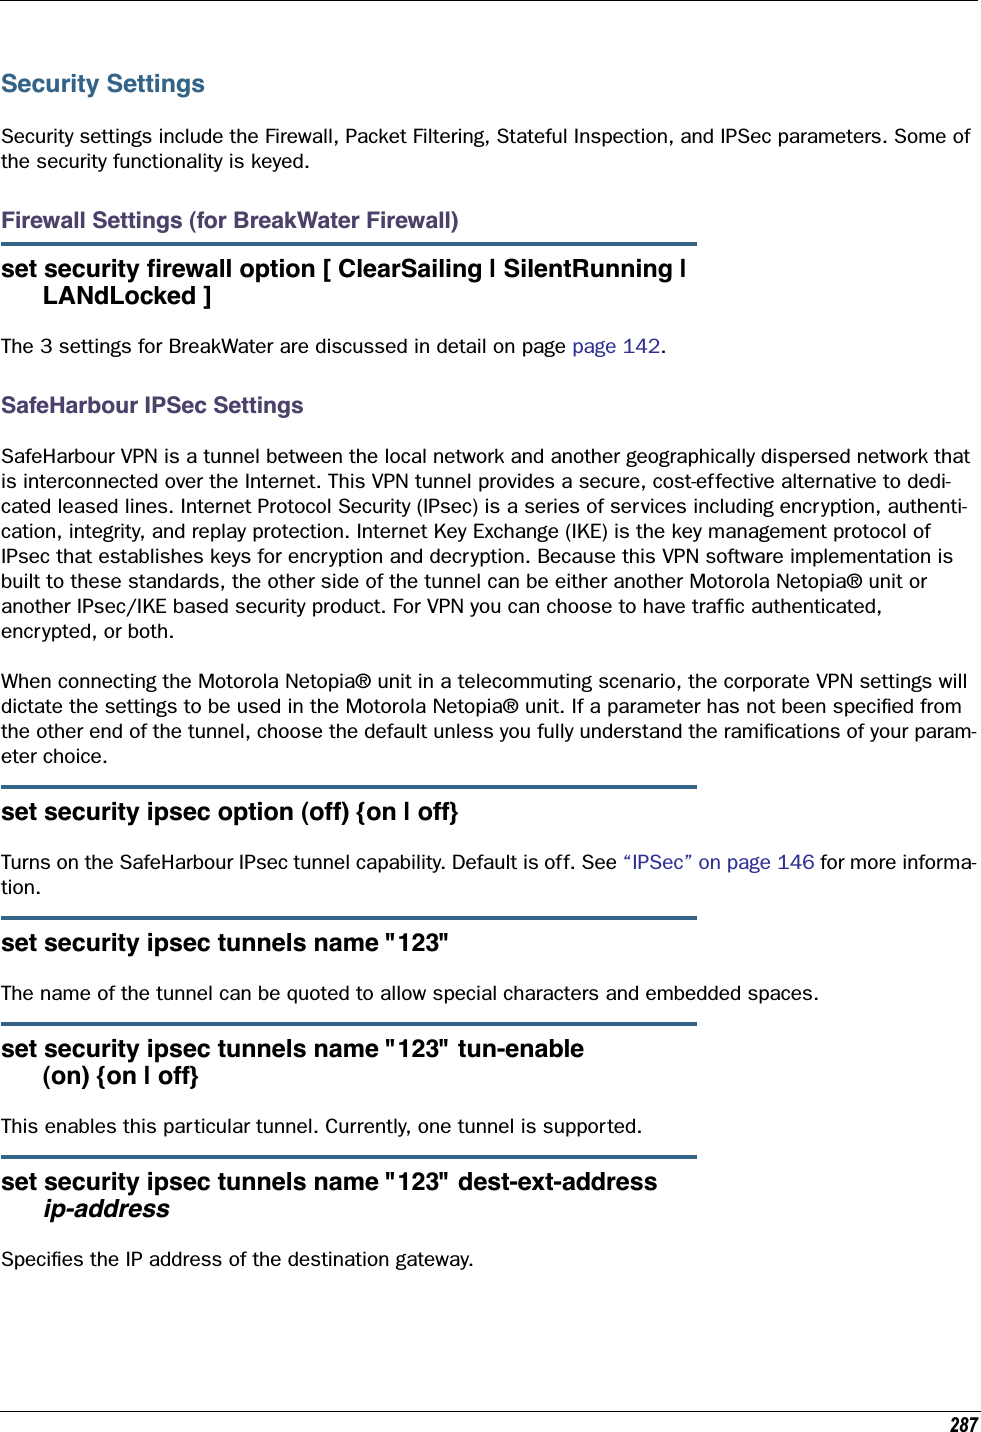 287Security SettingsSecurity settings include the Firewall, Packet Filtering, Stateful Inspection, and IPSec parameters. Some of the security functionality is keyed.Firewall Settings (for BreakWater Firewall)set security ﬁrewall option [ ClearSailing | SilentRunning |      LANdLocked ]The 3 settings for BreakWater are discussed in detail on page page 142.SafeHarbour IPSec SettingsSafeHarbour VPN is a tunnel between the local network and another geographically dispersed network that is interconnected over the Internet. This VPN tunnel provides a secure, cost-effective alternative to dedi-cated leased lines. Internet Protocol Security (IPsec) is a series of services including encryption, authenti-cation, integrity, and replay protection. Internet Key Exchange (IKE) is the key management protocol of IPsec that establishes keys for encryption and decryption. Because this VPN software implementation is built to these standards, the other side of the tunnel can be either another Motorola Netopia® unit or another IPsec/IKE based security product. For VPN you can choose to have trafﬁc authenticated, encrypted, or both.When connecting the Motorola Netopia® unit in a telecommuting scenario, the corporate VPN settings will dictate the settings to be used in the Motorola Netopia® unit. If a parameter has not been speciﬁed from the other end of the tunnel, choose the default unless you fully understand the ramiﬁcations of your param-eter choice.set security ipsec option (off) {on | off}Turns on the SafeHarbour IPsec tunnel capability. Default is off. See “IPSec” on page 146 for more informa-tion.set security ipsec tunnels name &quot;123&quot;The name of the tunnel can be quoted to allow special characters and embedded spaces. set security ipsec tunnels name &quot;123&quot; tun-enable       (on) {on | off}This enables this particular tunnel. Currently, one tunnel is supported.set security ipsec tunnels name &quot;123&quot; dest-ext-address       ip-addressSpeciﬁes the IP address of the destination gateway.